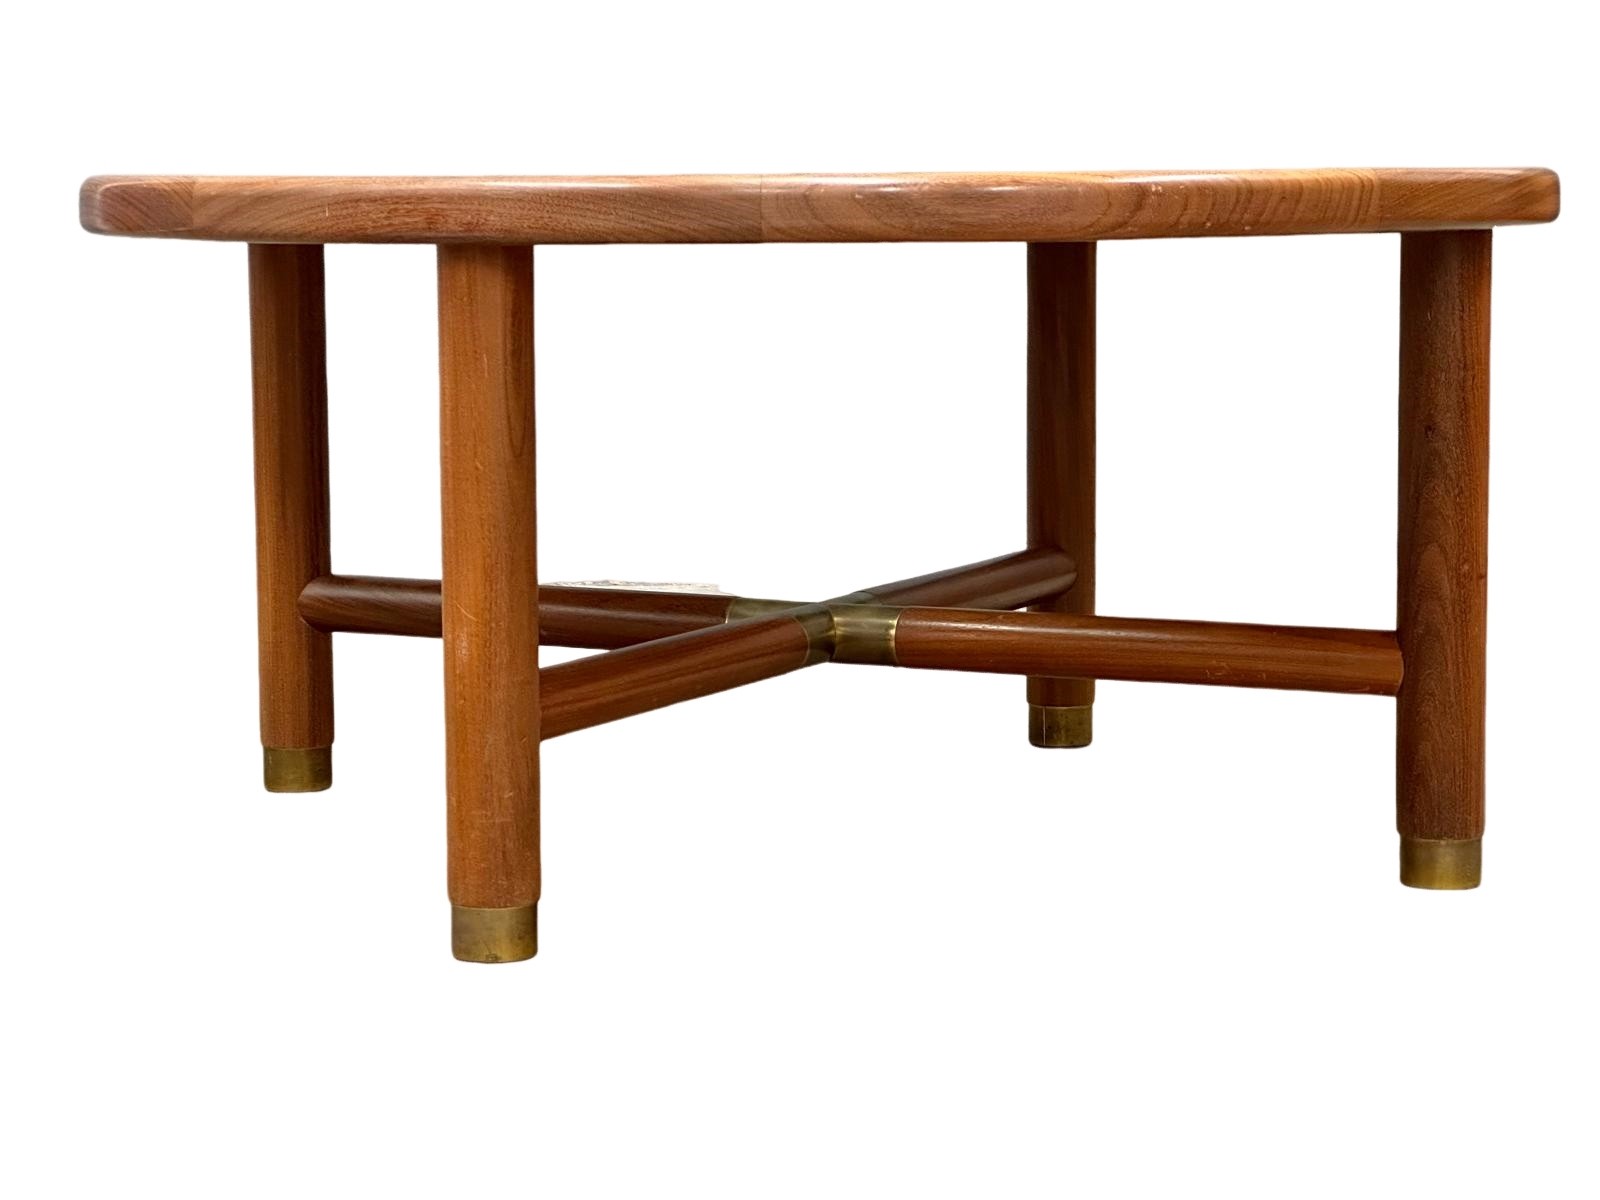 A G-Plan Mid Century teak ‘Sunburst’ coffee table with smoked glass top. 96.5x45cm - Image 3 of 3